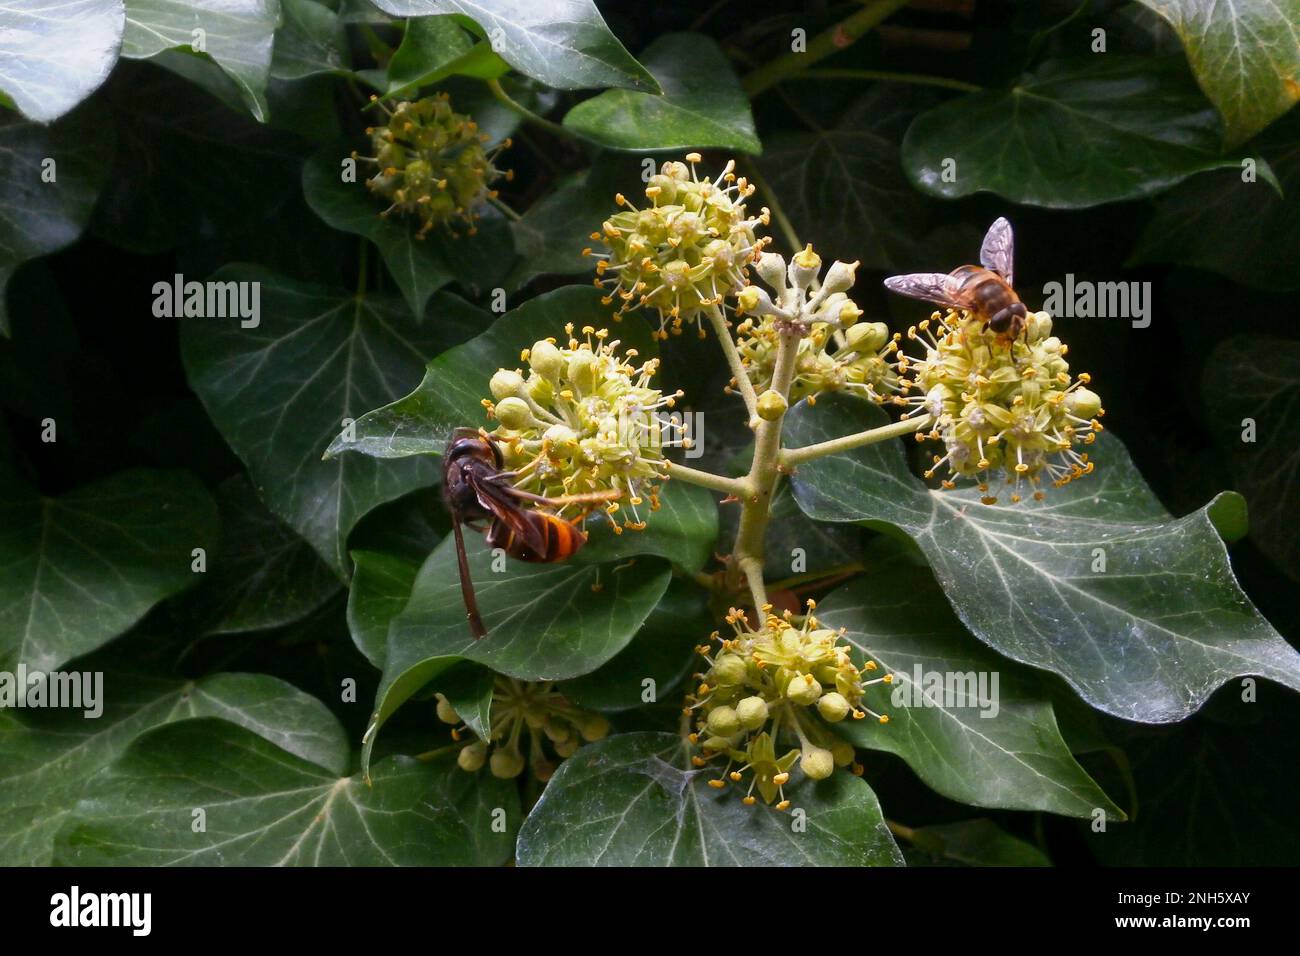 Close-up on an Asian hornet next to a Bee. Stock Photo